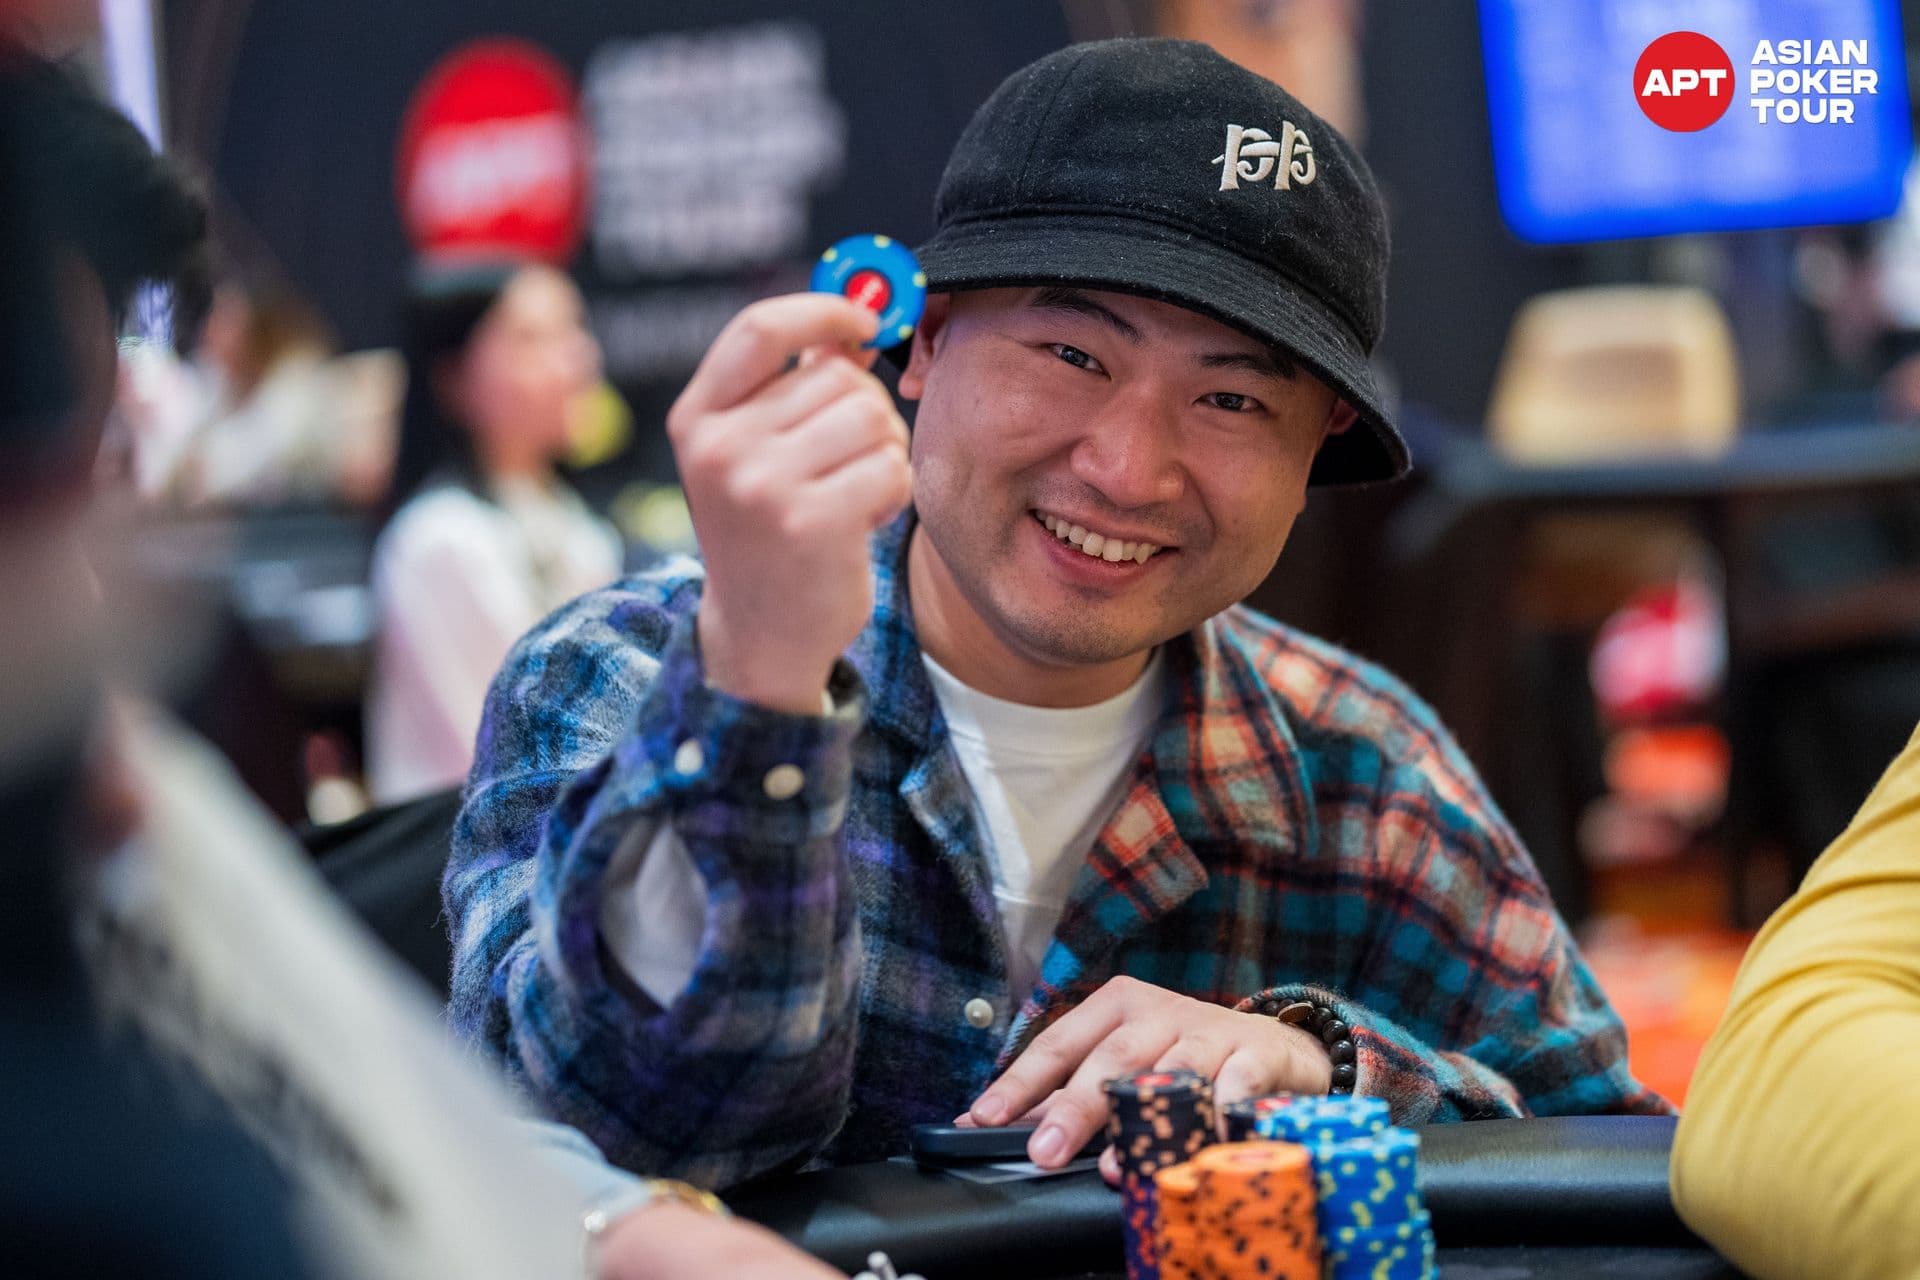 Main Event Flight B Attracts 289 Entries; Japan's Norihide Tanaka Bags Biggest